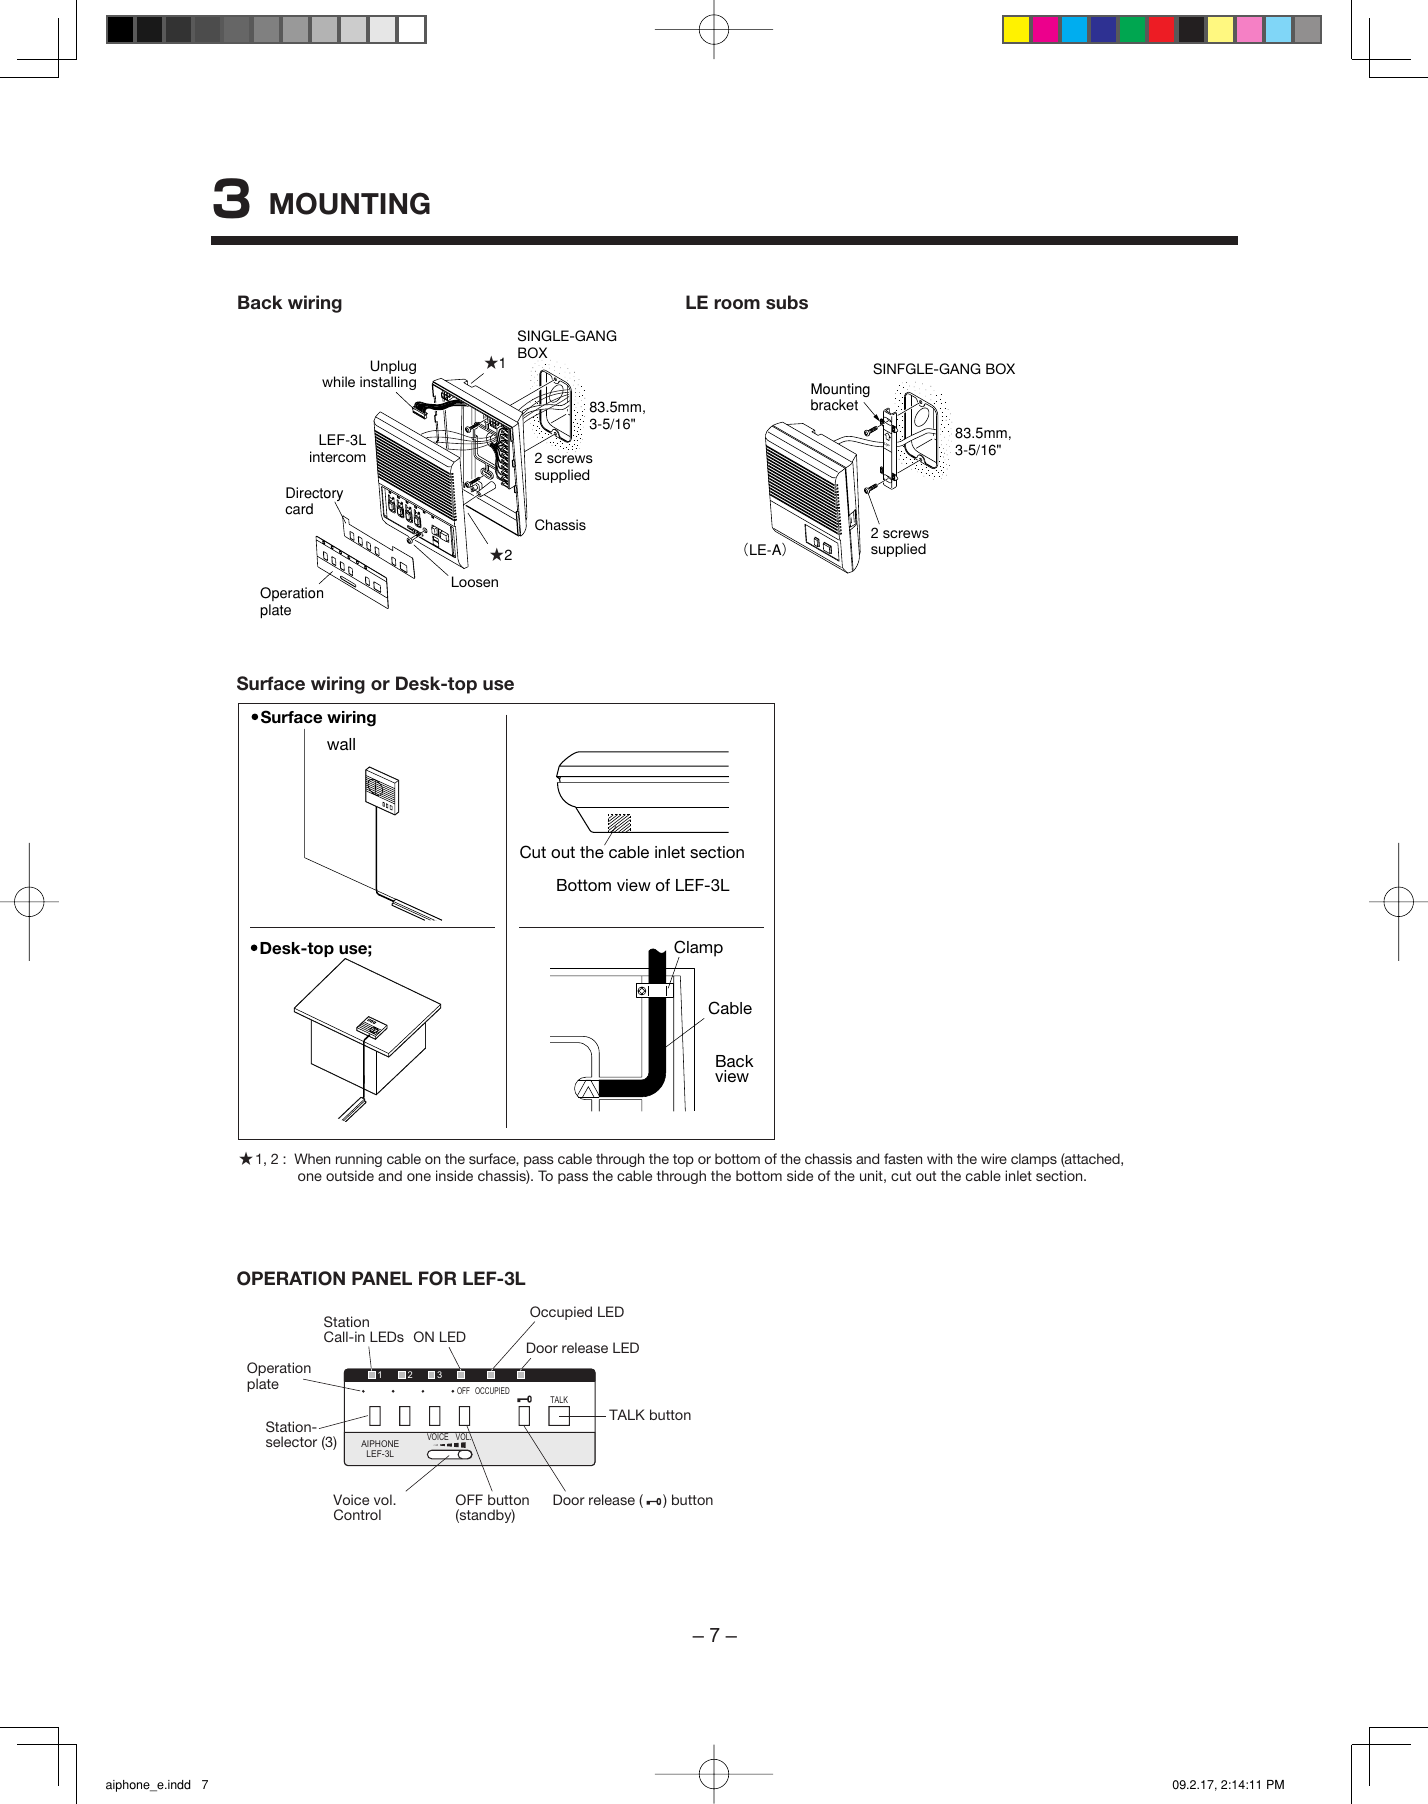 Page 7 of 12 - Aiphone Aiphone-Lef-3L-Users-Manual- Aiphone_e  Aiphone-lef-3l-users-manual